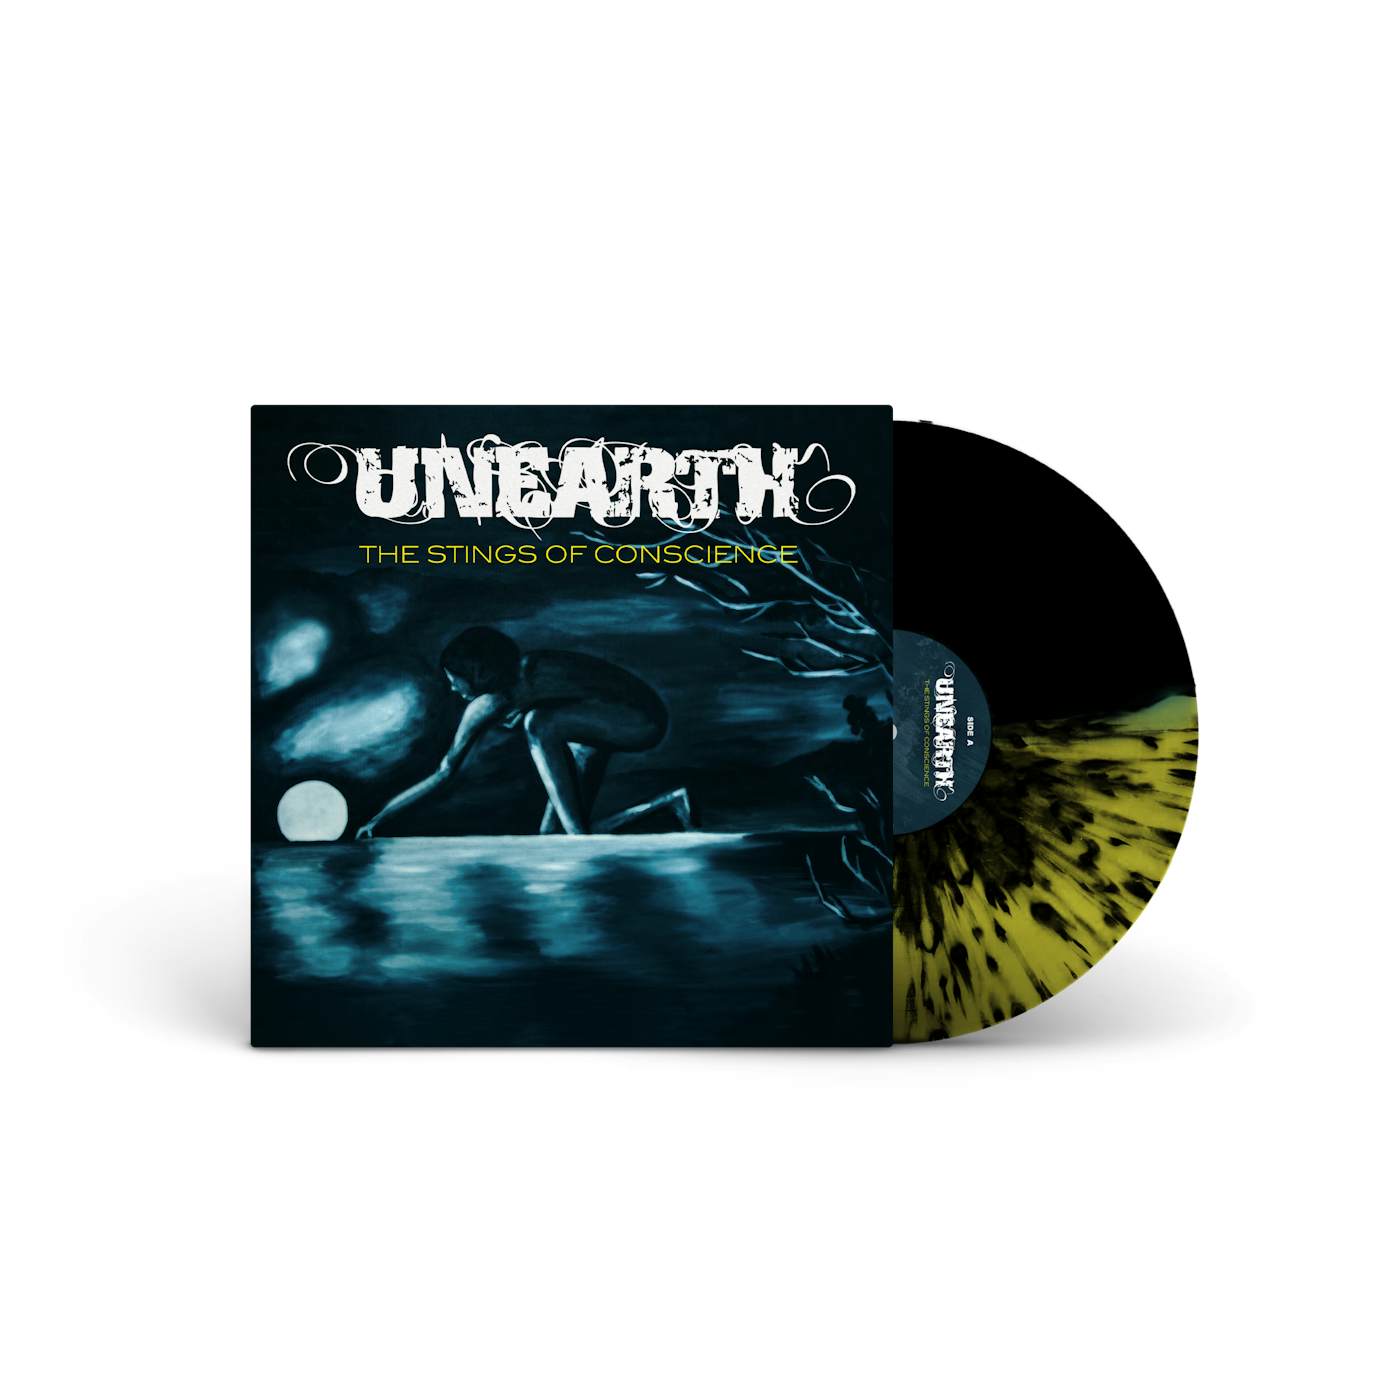 Unearth 'The Stings of Conscience' Half Black/Canary Yellow Vinyl